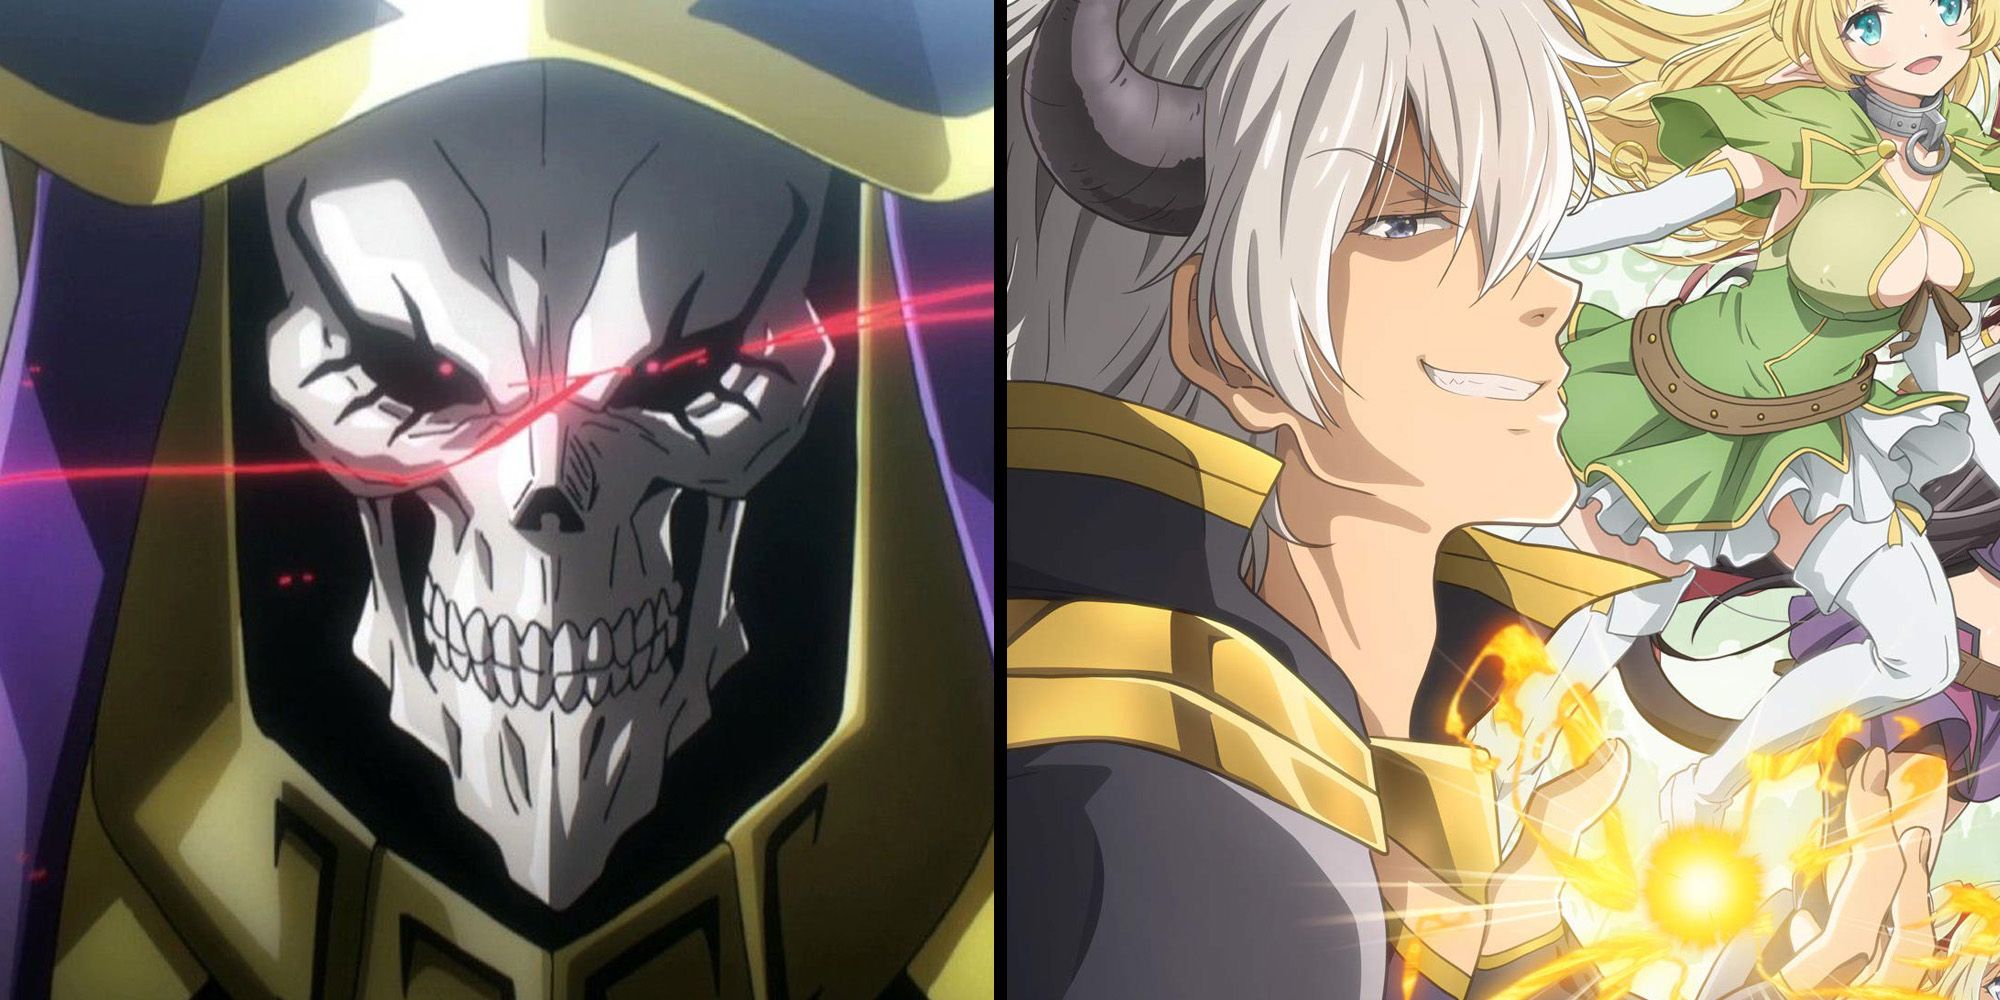 8 Isekai Anime To Watch If You Like Skeleton Knight In Another World